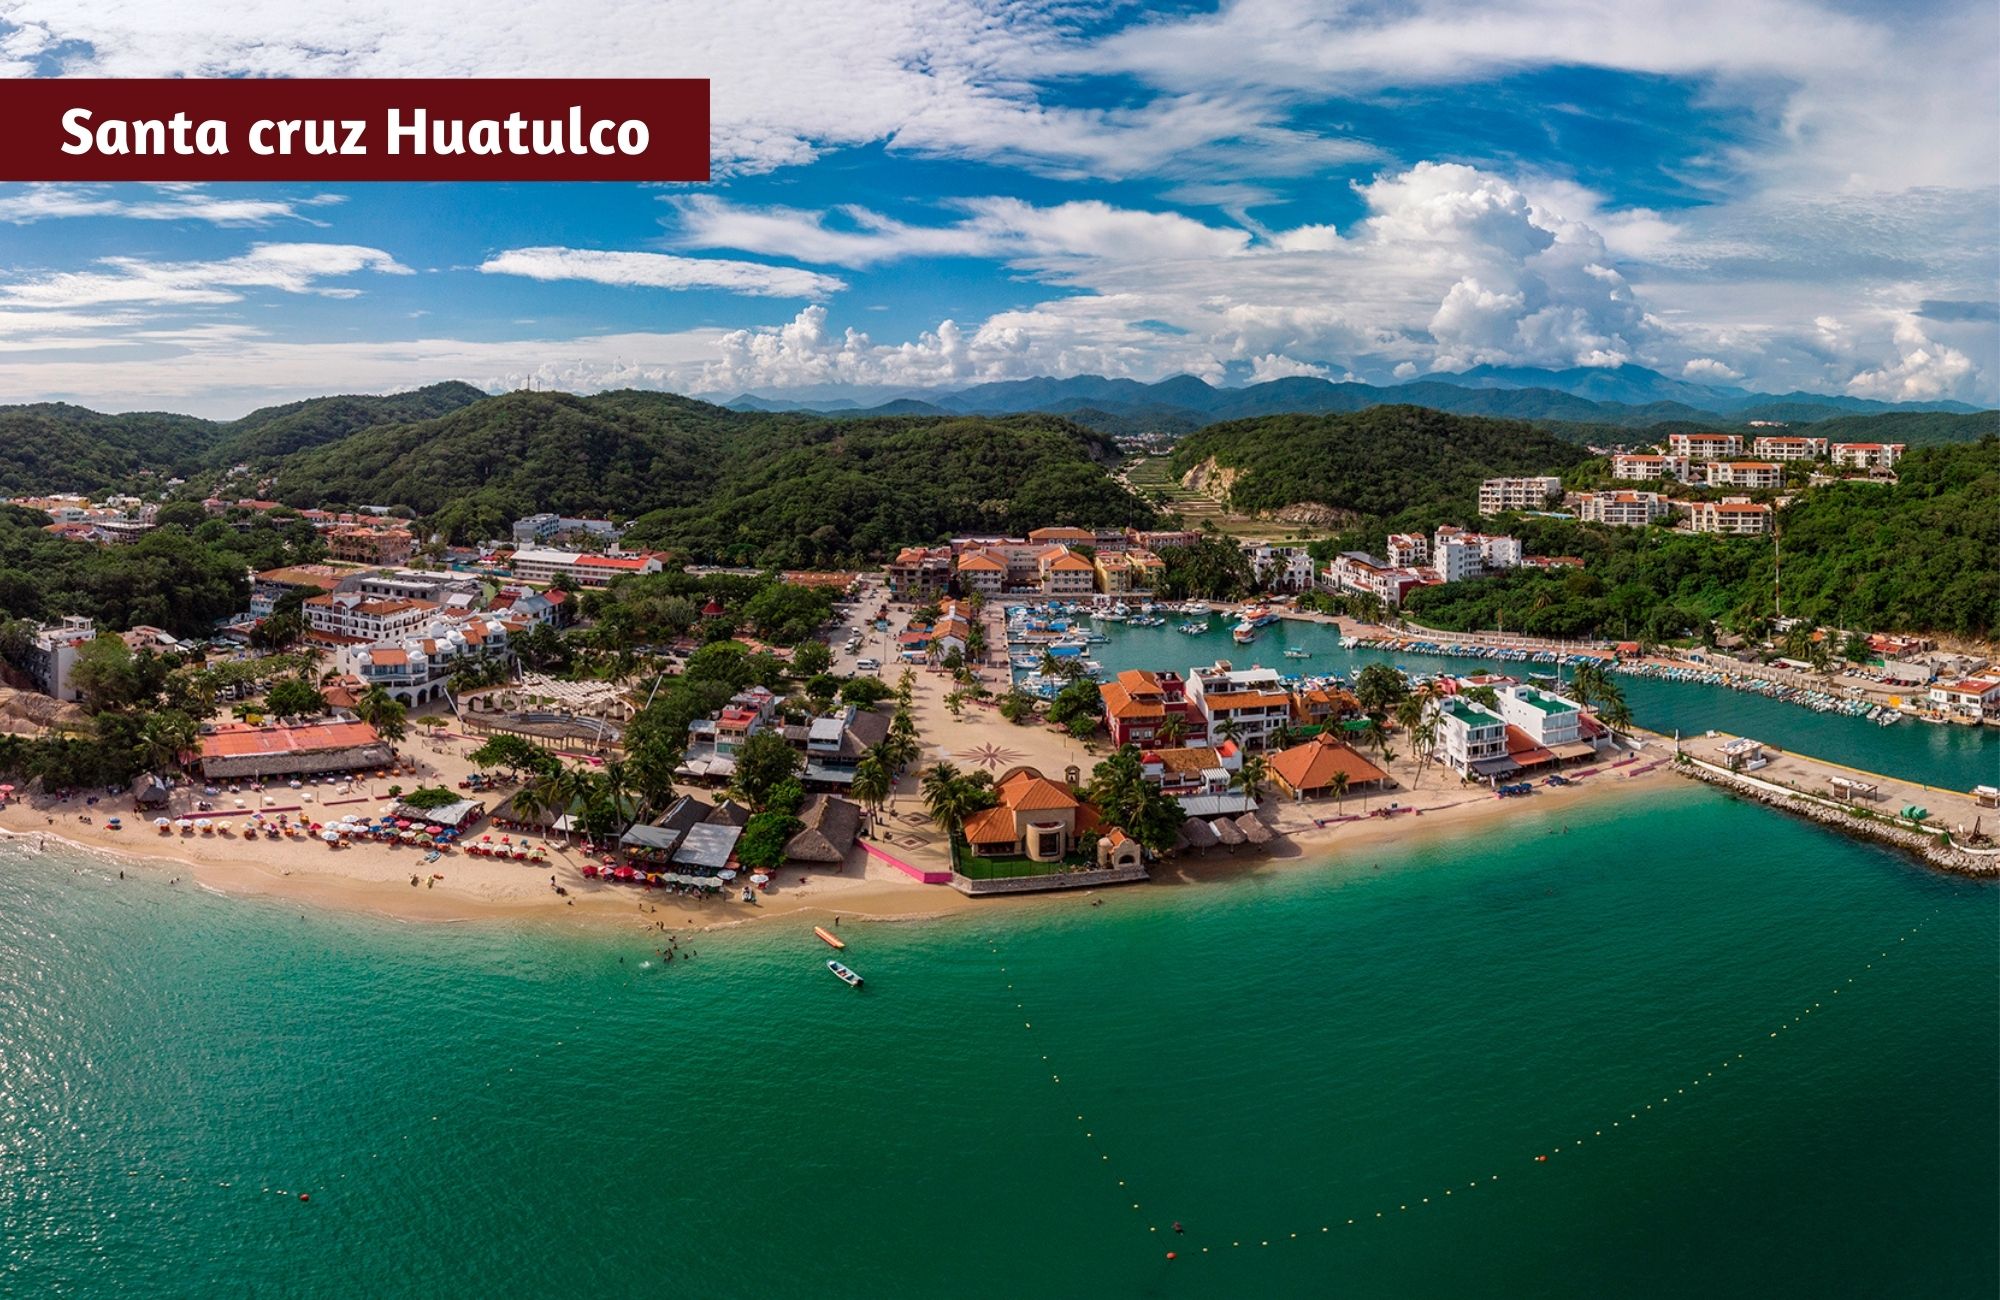 Condo with ocean view and private pool for sale in Huatulco.